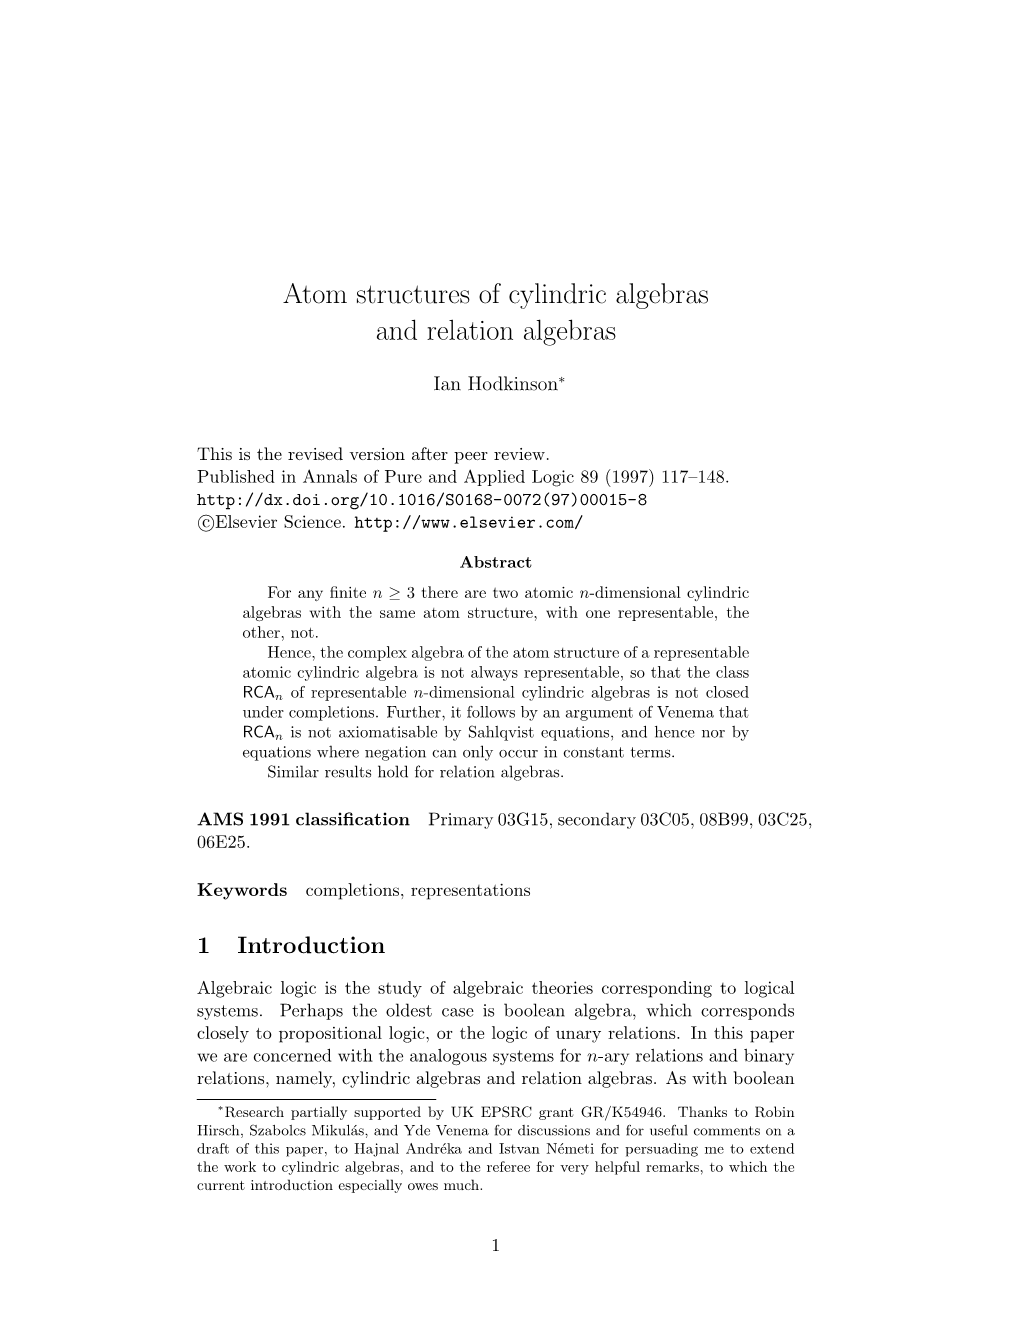 Atom Structures of Cylindric Algebras and Relation Algebras